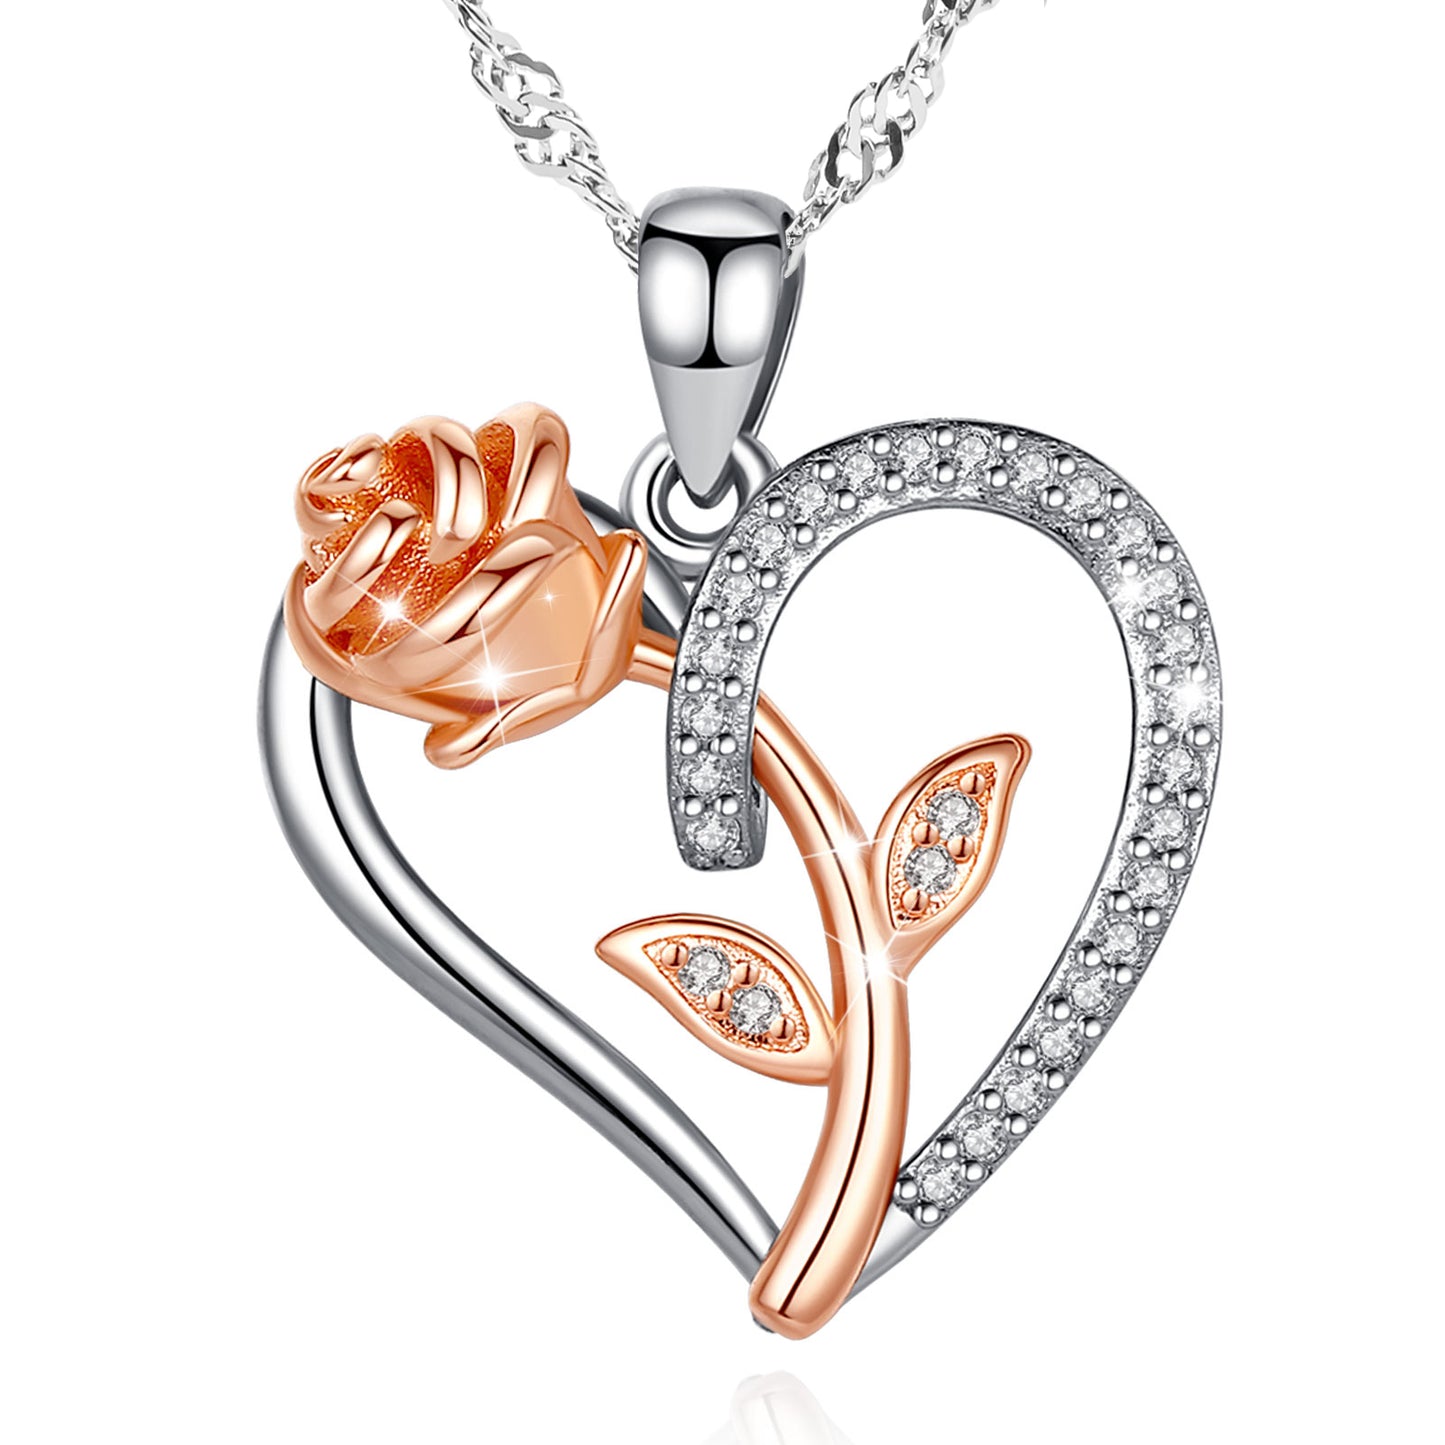 Rose in the Heart Crystal pendant 925 Sterling Silver Water Wave necklace chain 18"